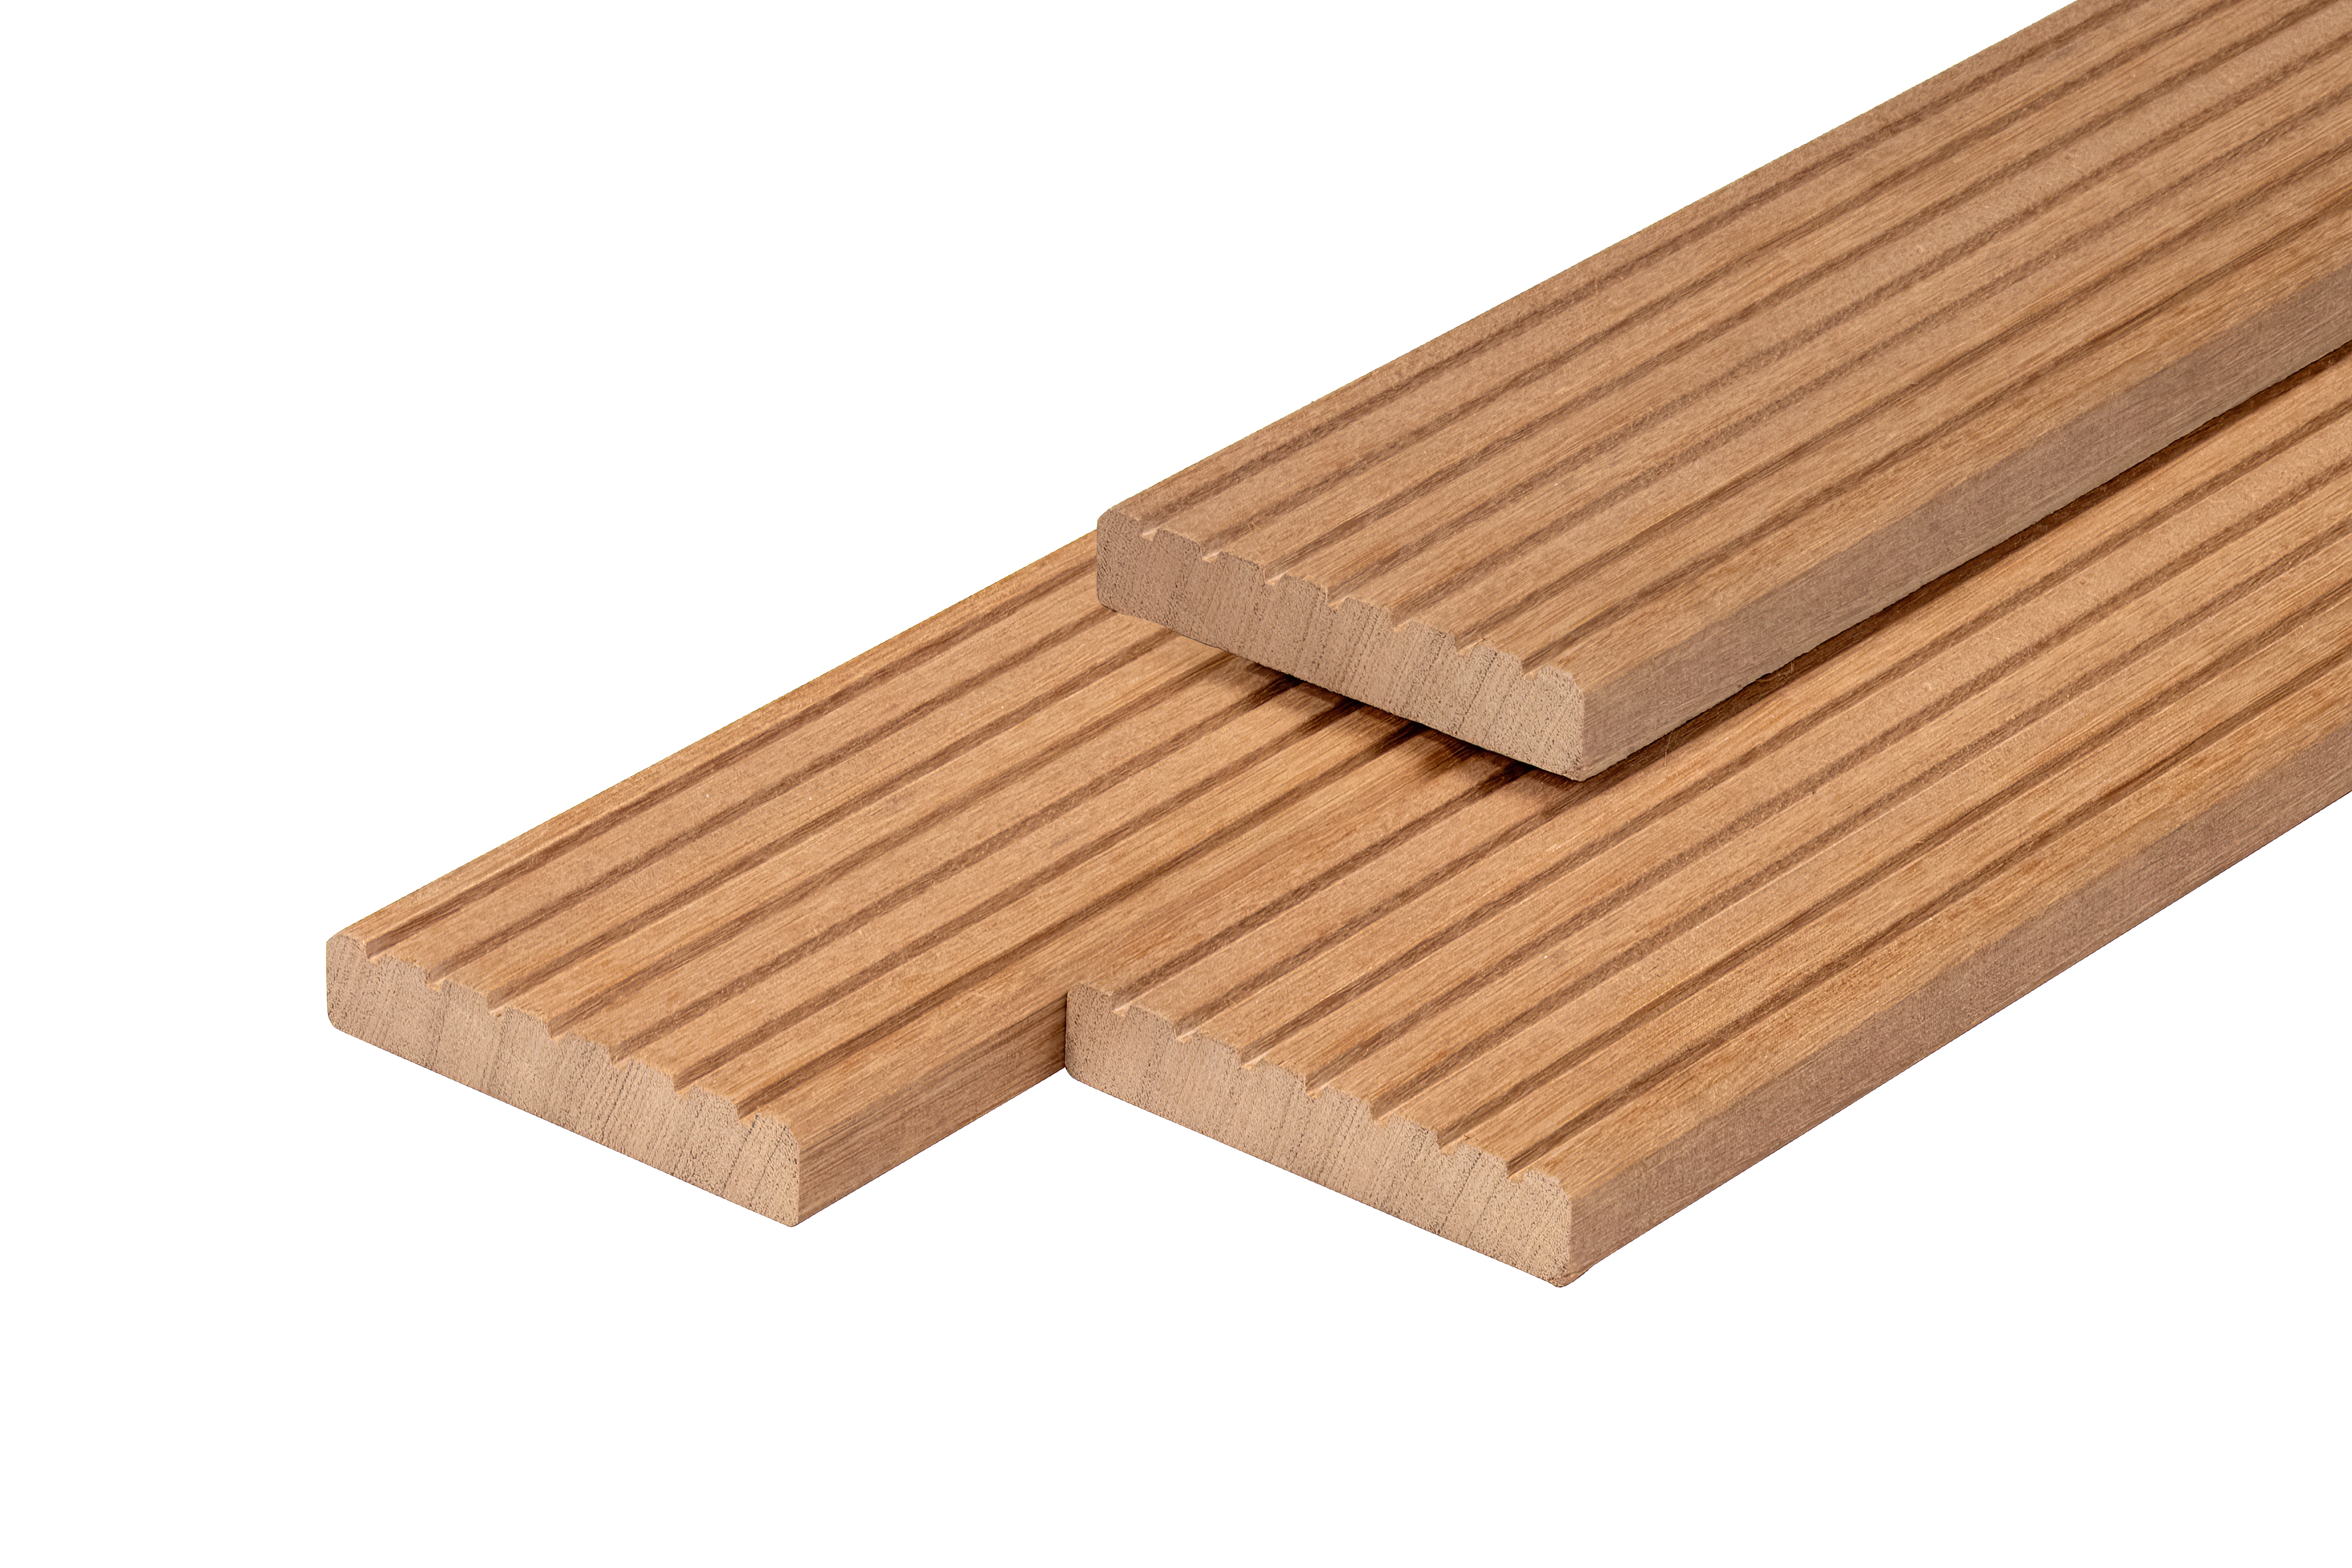 Bangkirai decking board dried 2.5x14.5x365 cm planed 7 grooves + 1 side smooth